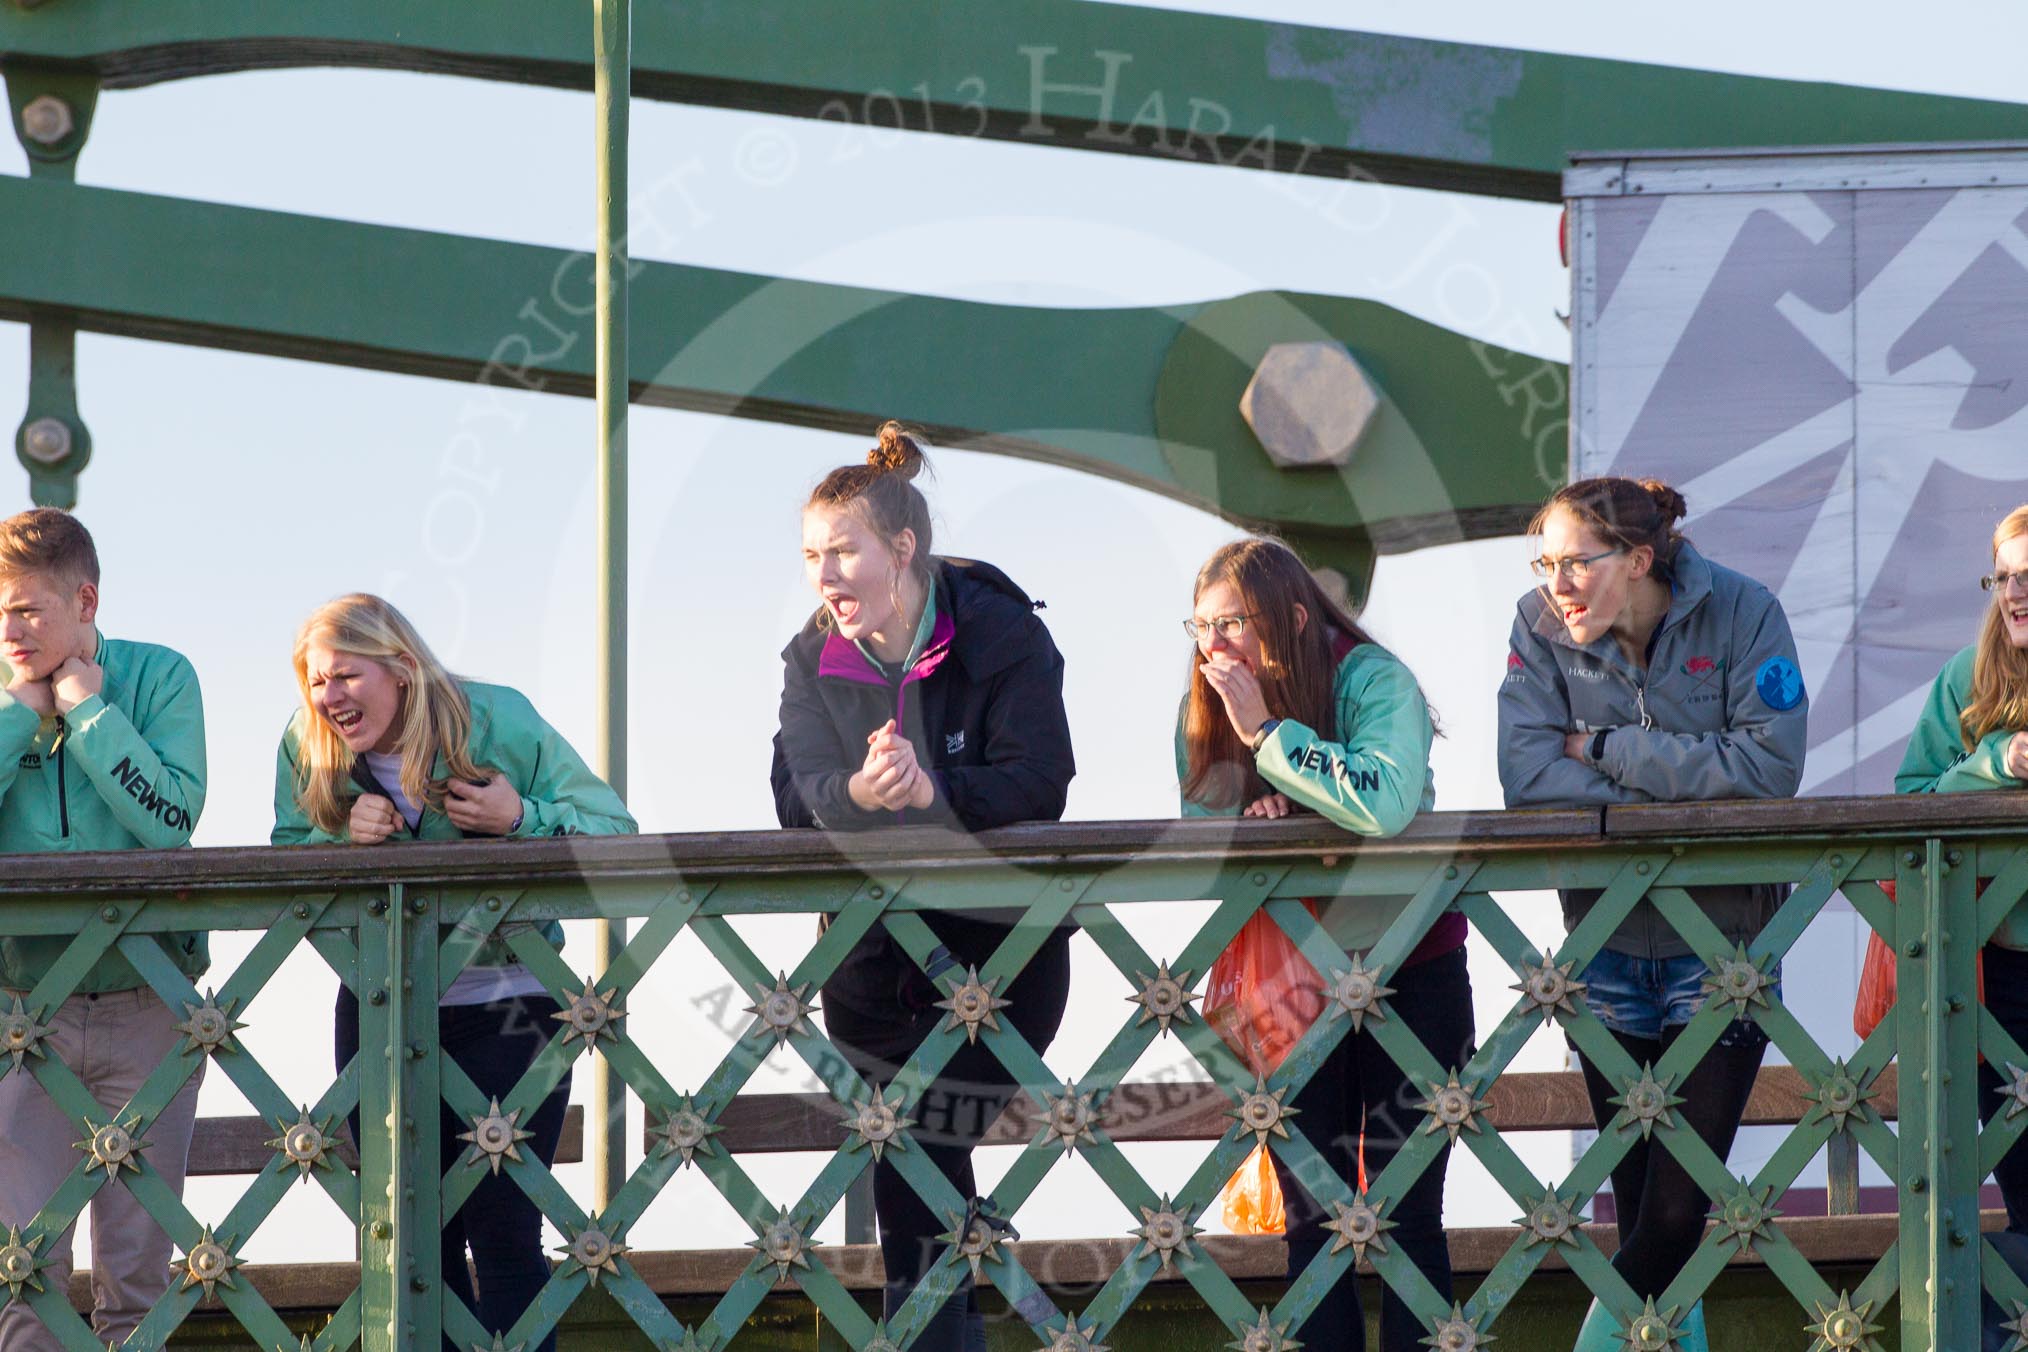 The Boat Race season 2014 - Women's Trial VIIIs(CUWBC, Cambridge): Onlookers watching the race from Hammersmith Bridge..
River Thames between Putney Bridge and Mortlake,
London SW15,

United Kingdom,
on 19 December 2013 at 14:10, image #404